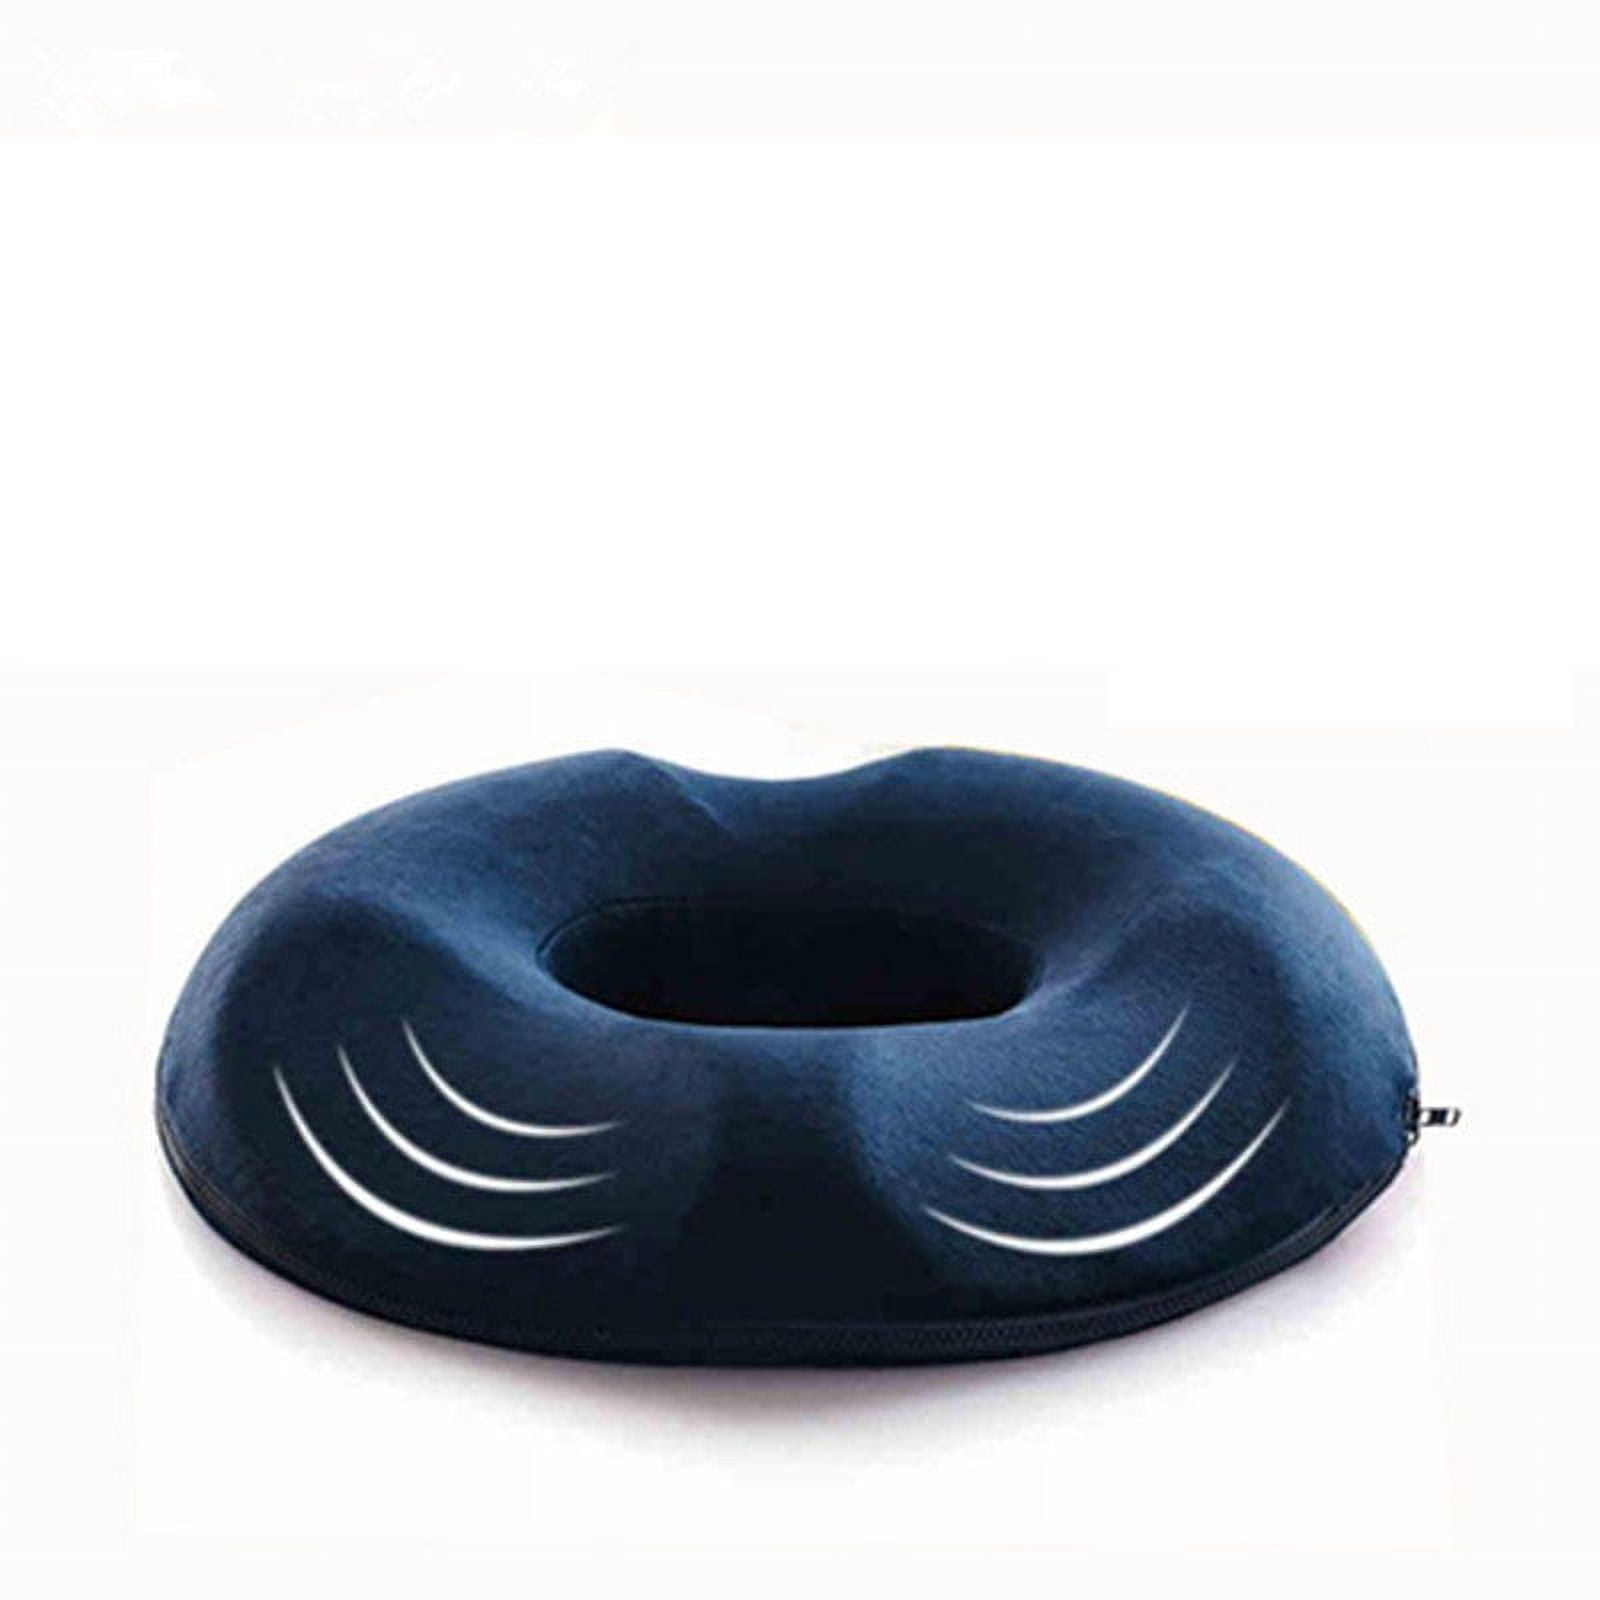  AnboCare Donut Gel Sitting Pillow - Orthopedic Memory Foam for  Tailbone Pain, Hemorrhoid, Bed Sores, Postpartum, Prostate, Coccyx &  Sciatica Pain : Health & Household